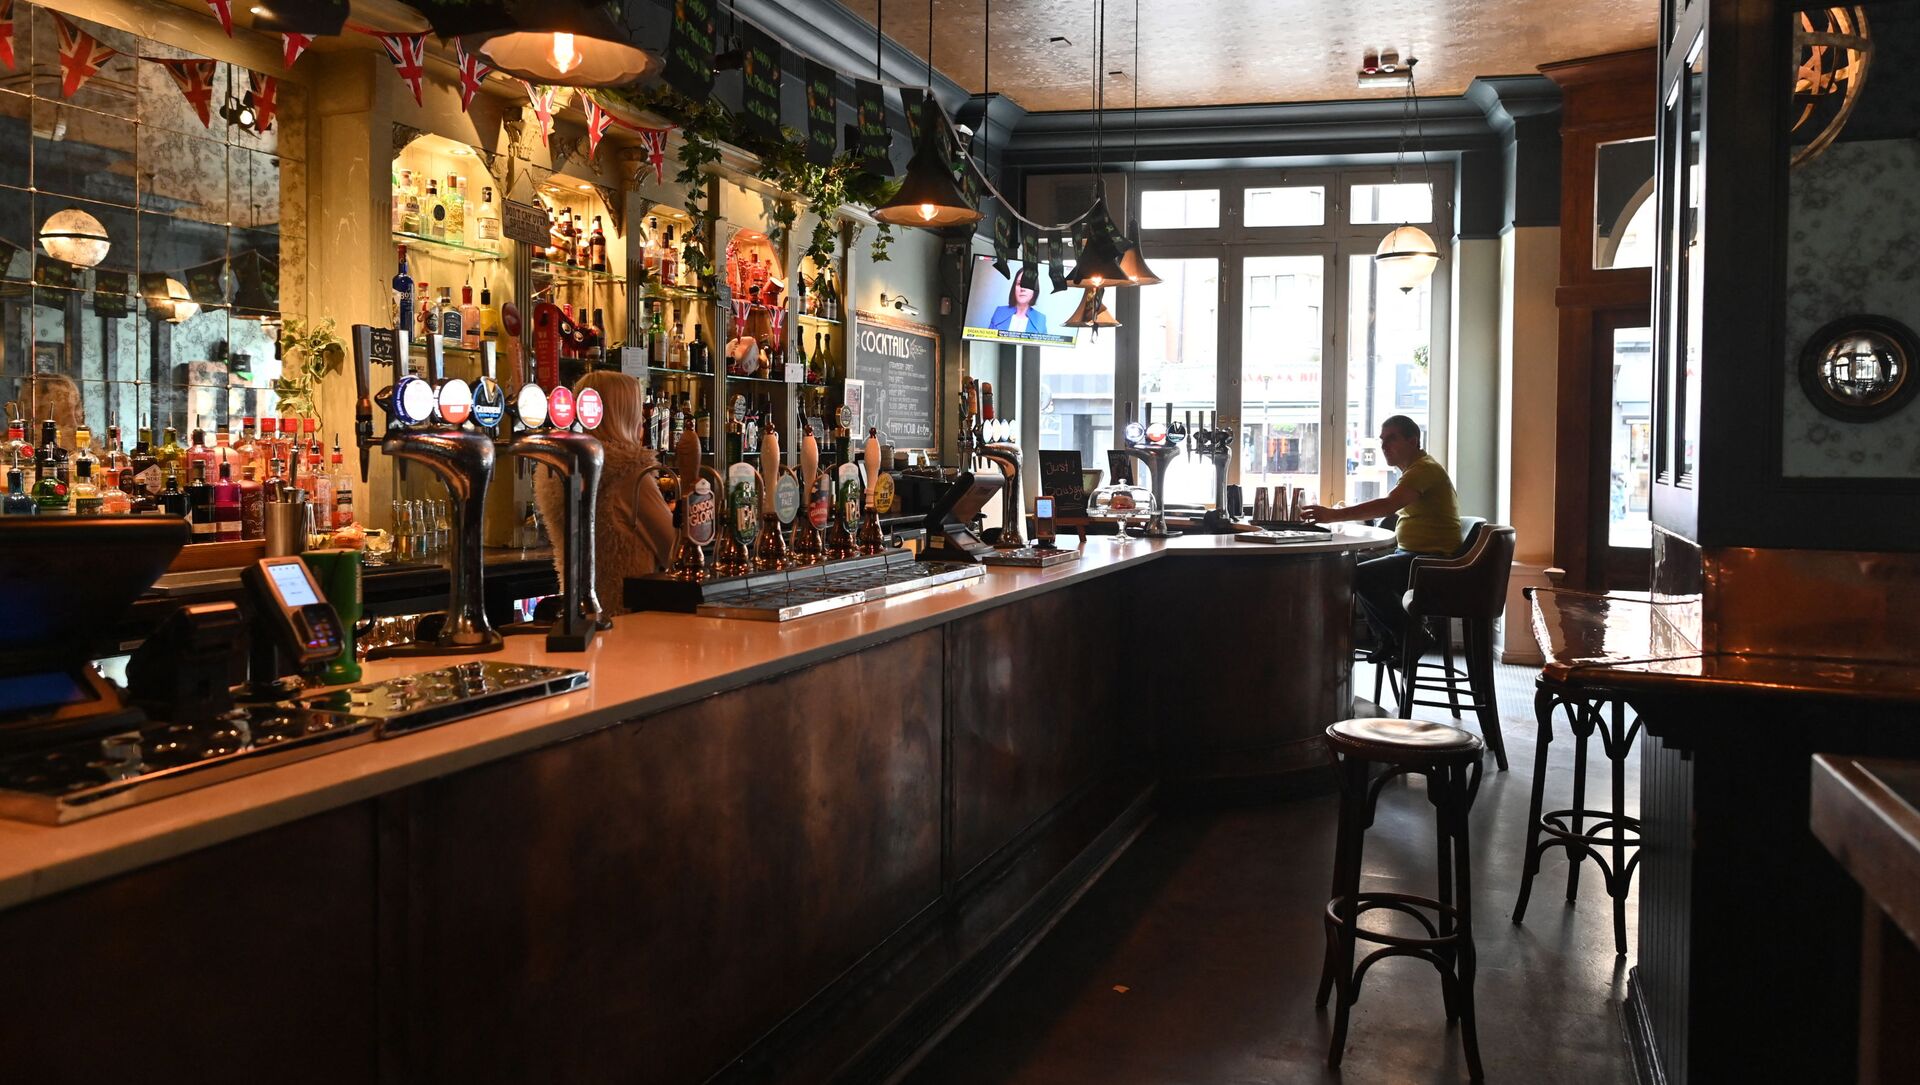 A single customer sits at the bar in a near-empty pub in central London on March 17, 2020 after the UK government announced stringent social distancing advice including avoiding pubs and restaurants as a measure to kerb the spread of novel coronavirus COVID-19 - Sputnik International, 1920, 24.02.2021